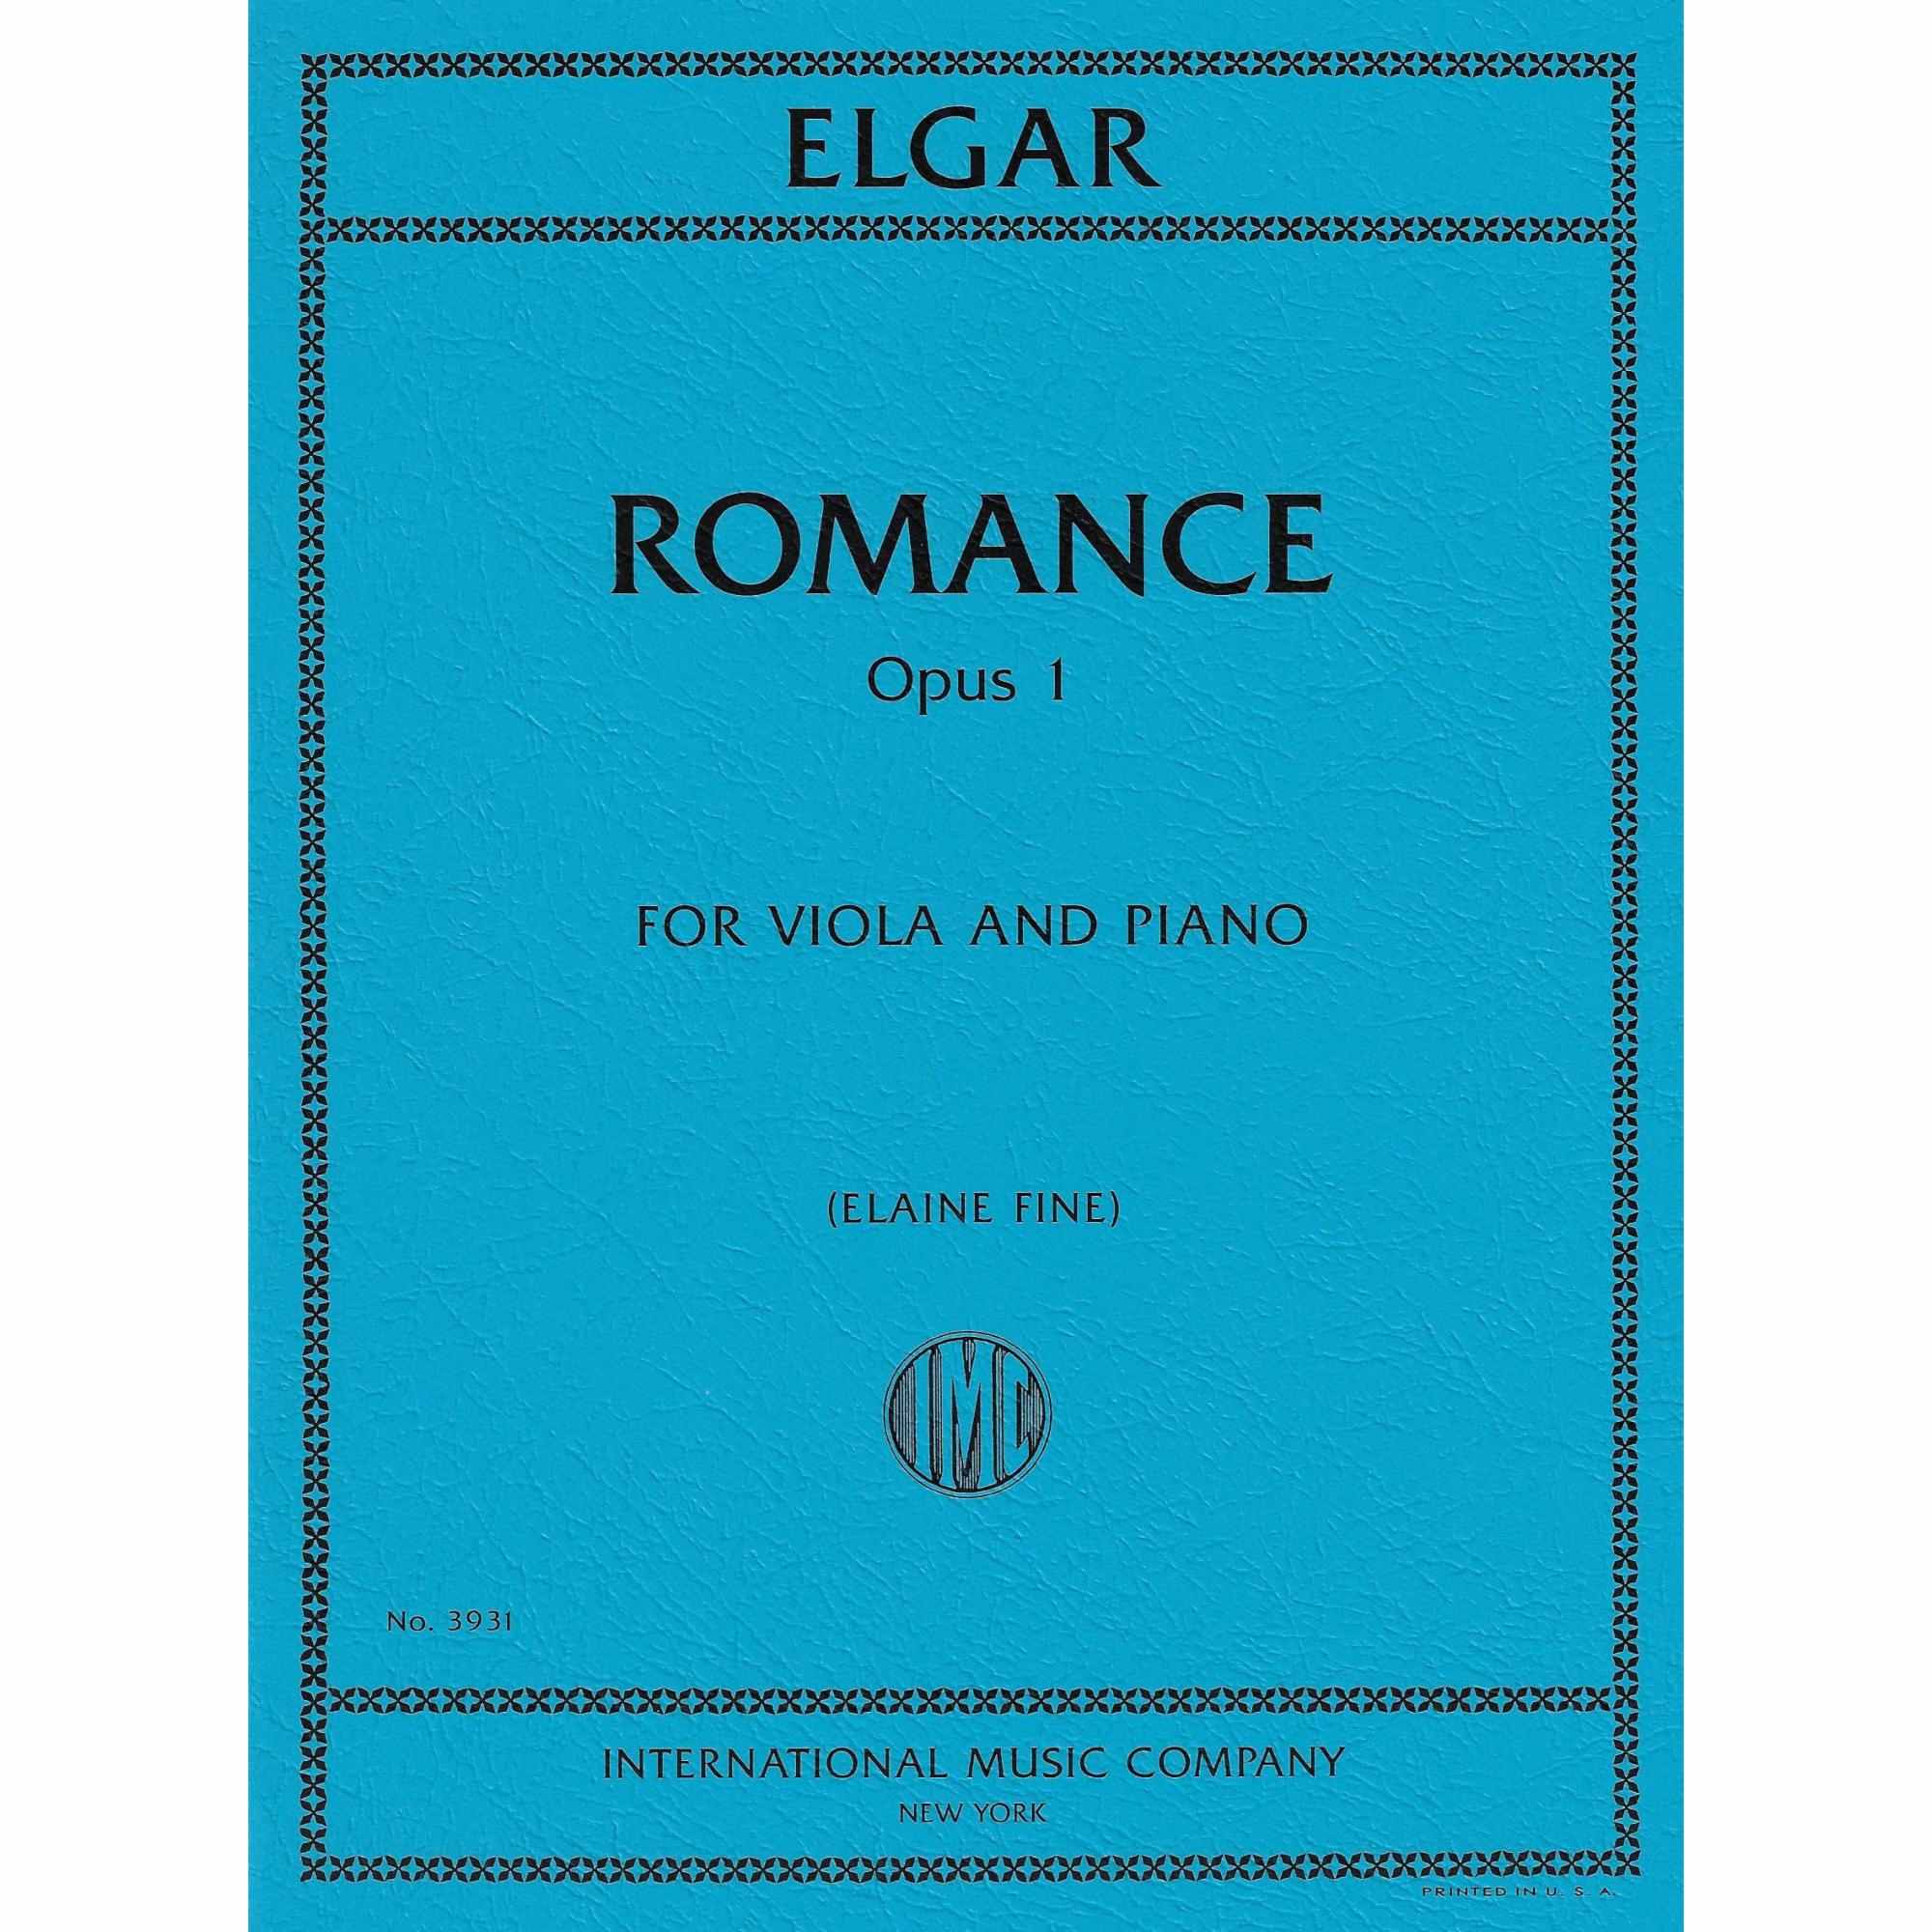 Elgar -- Romance, Op. 1 for Viola and Piano